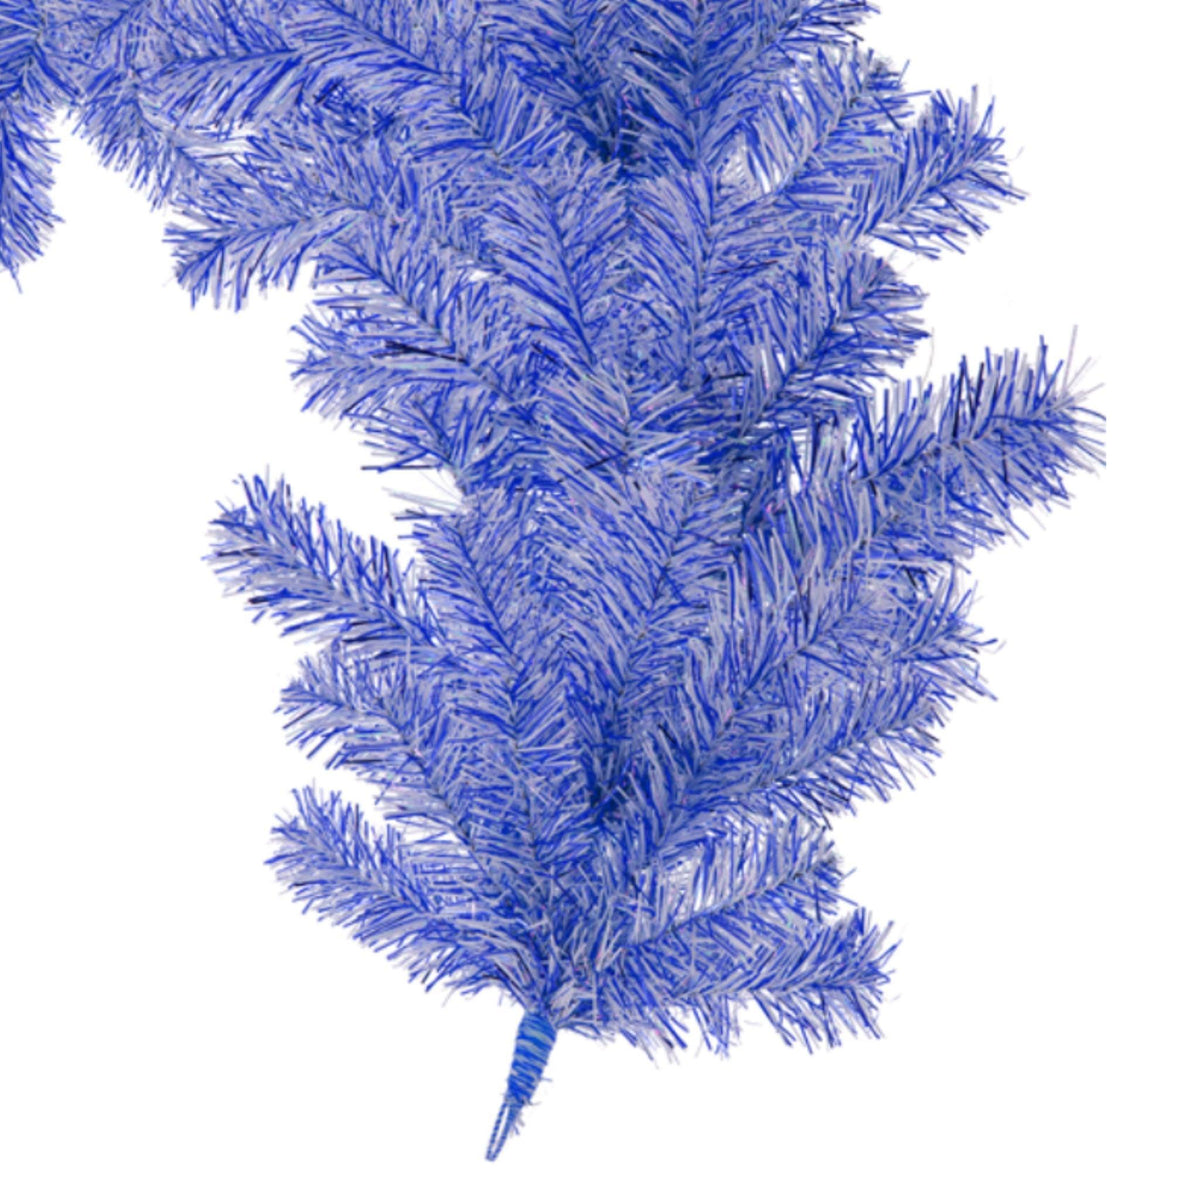 Buy Lee Display's 6FT Blue and White Tinsel Christmas Brush Garlands.  On sale now at leedisplay.com.  Bottom Section with wire.